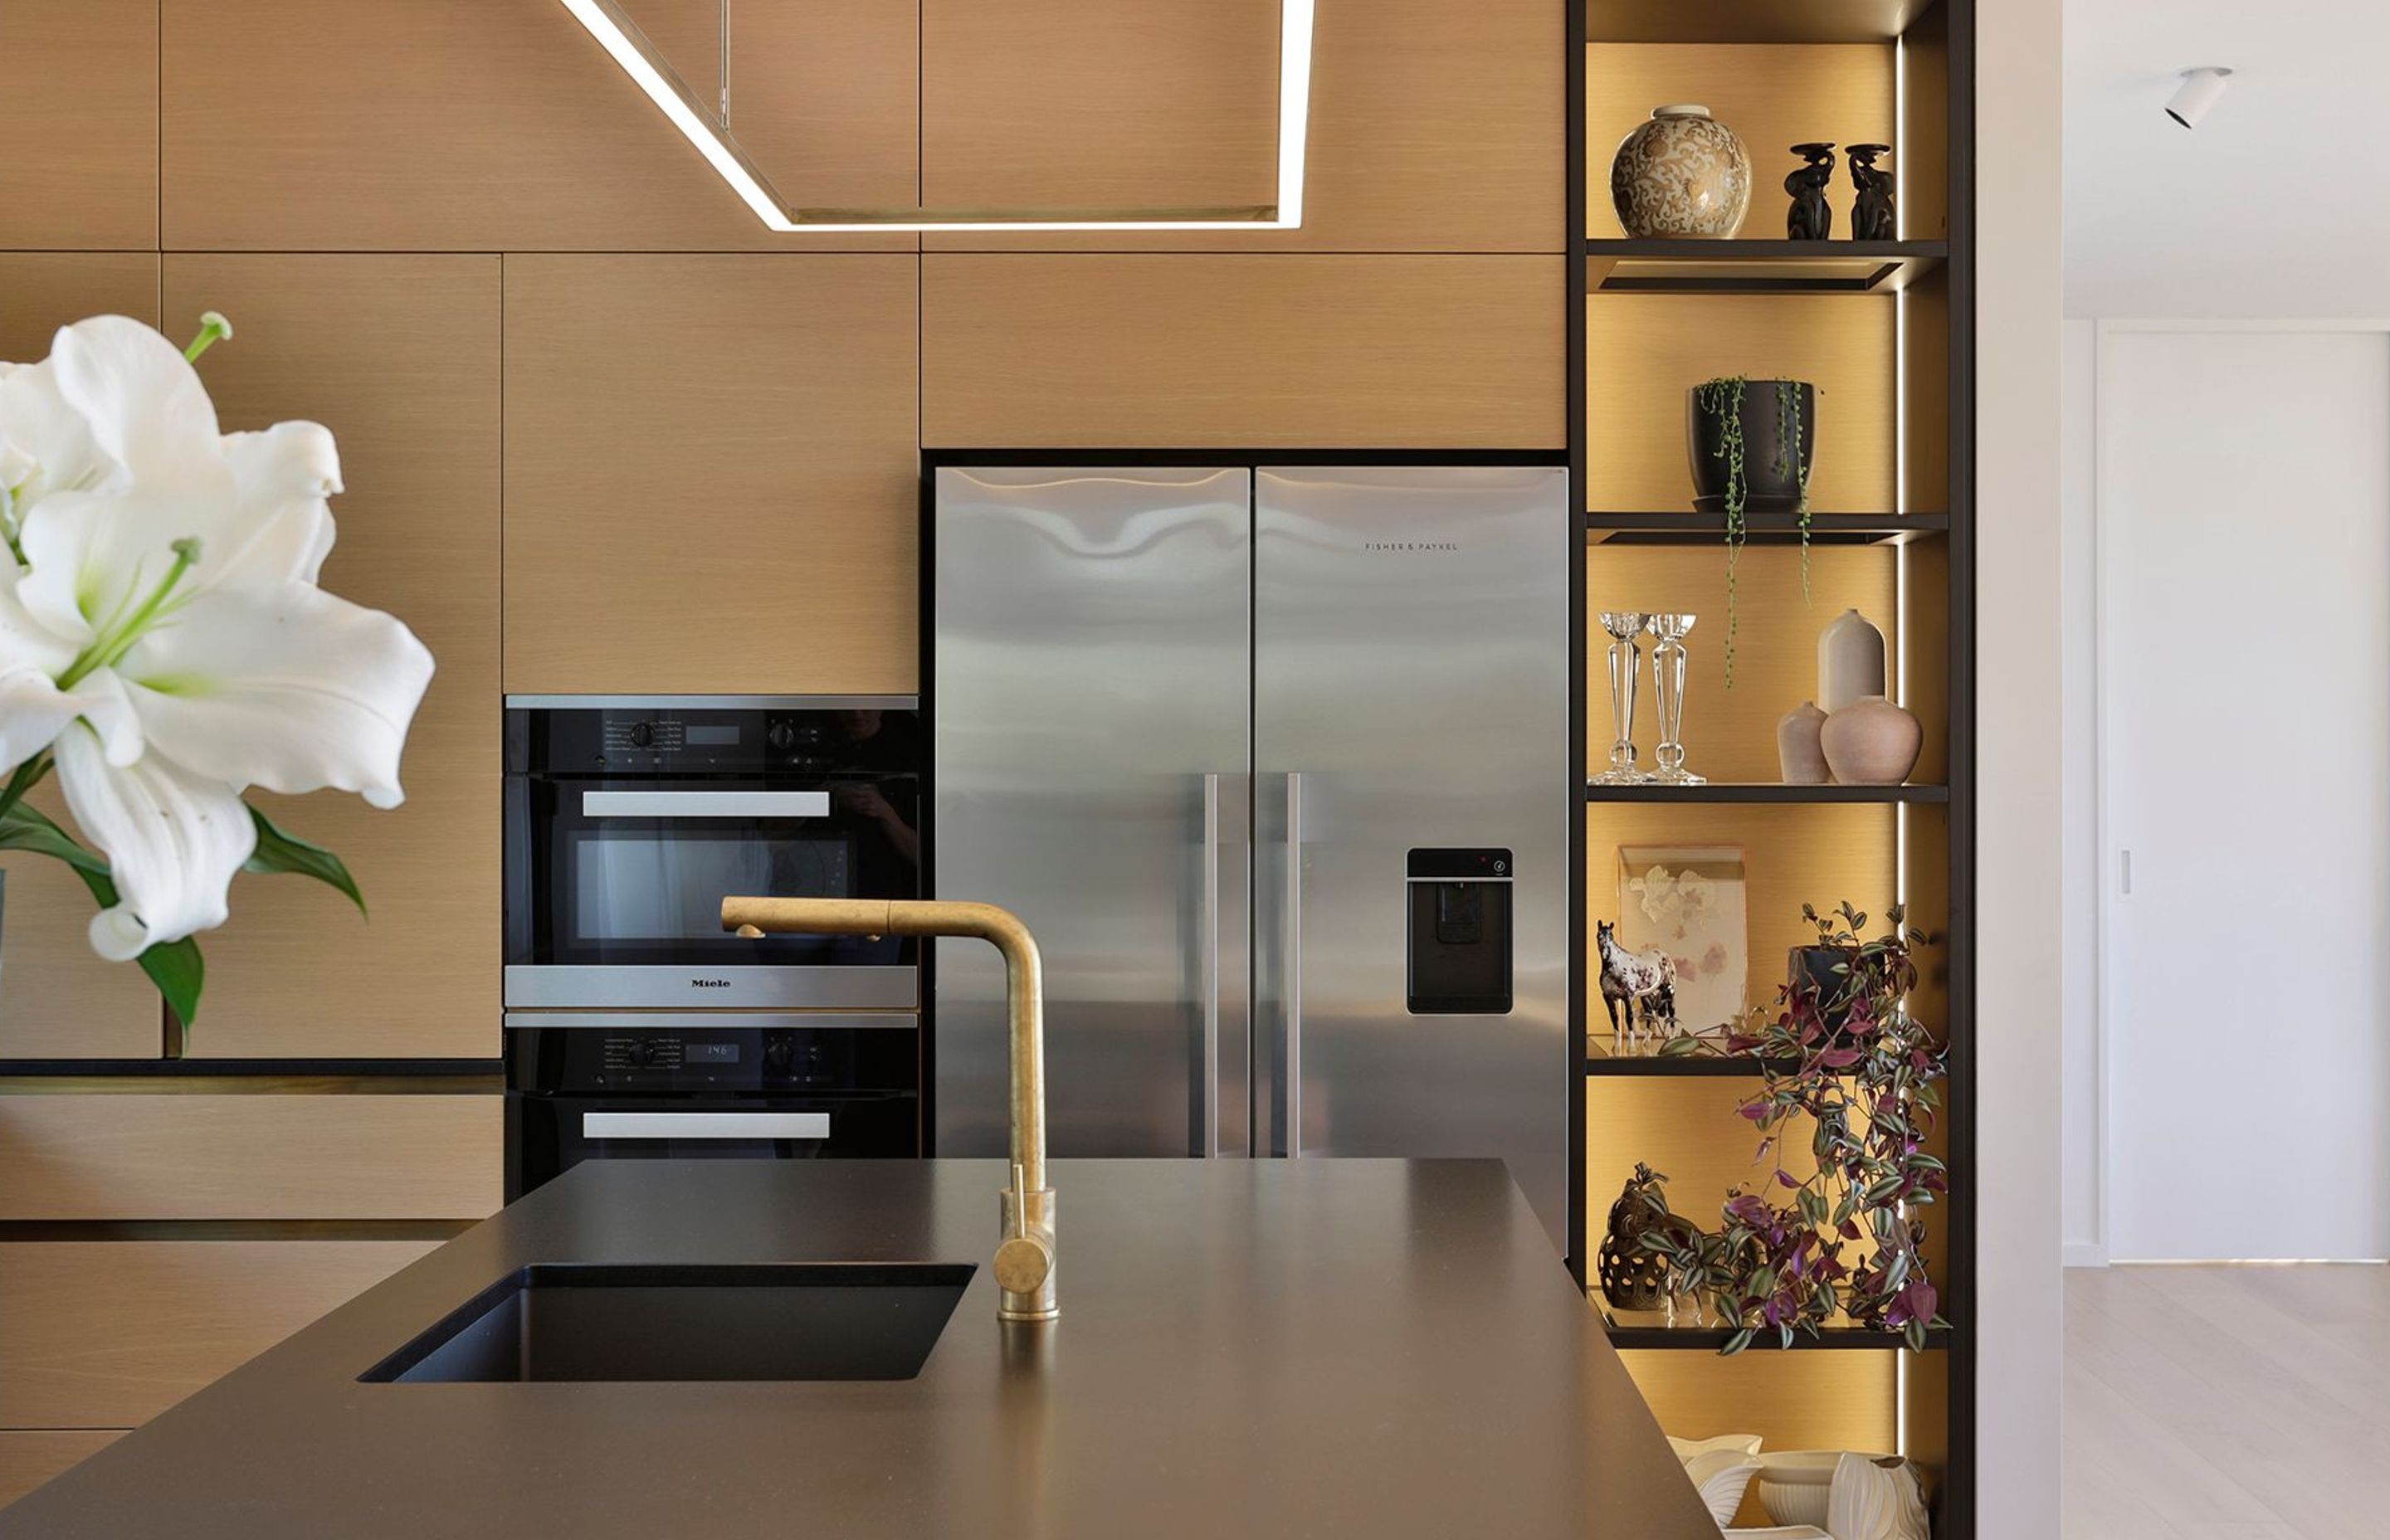 Golden hues mix beautifully with black and metallic finishes in the kitchen.